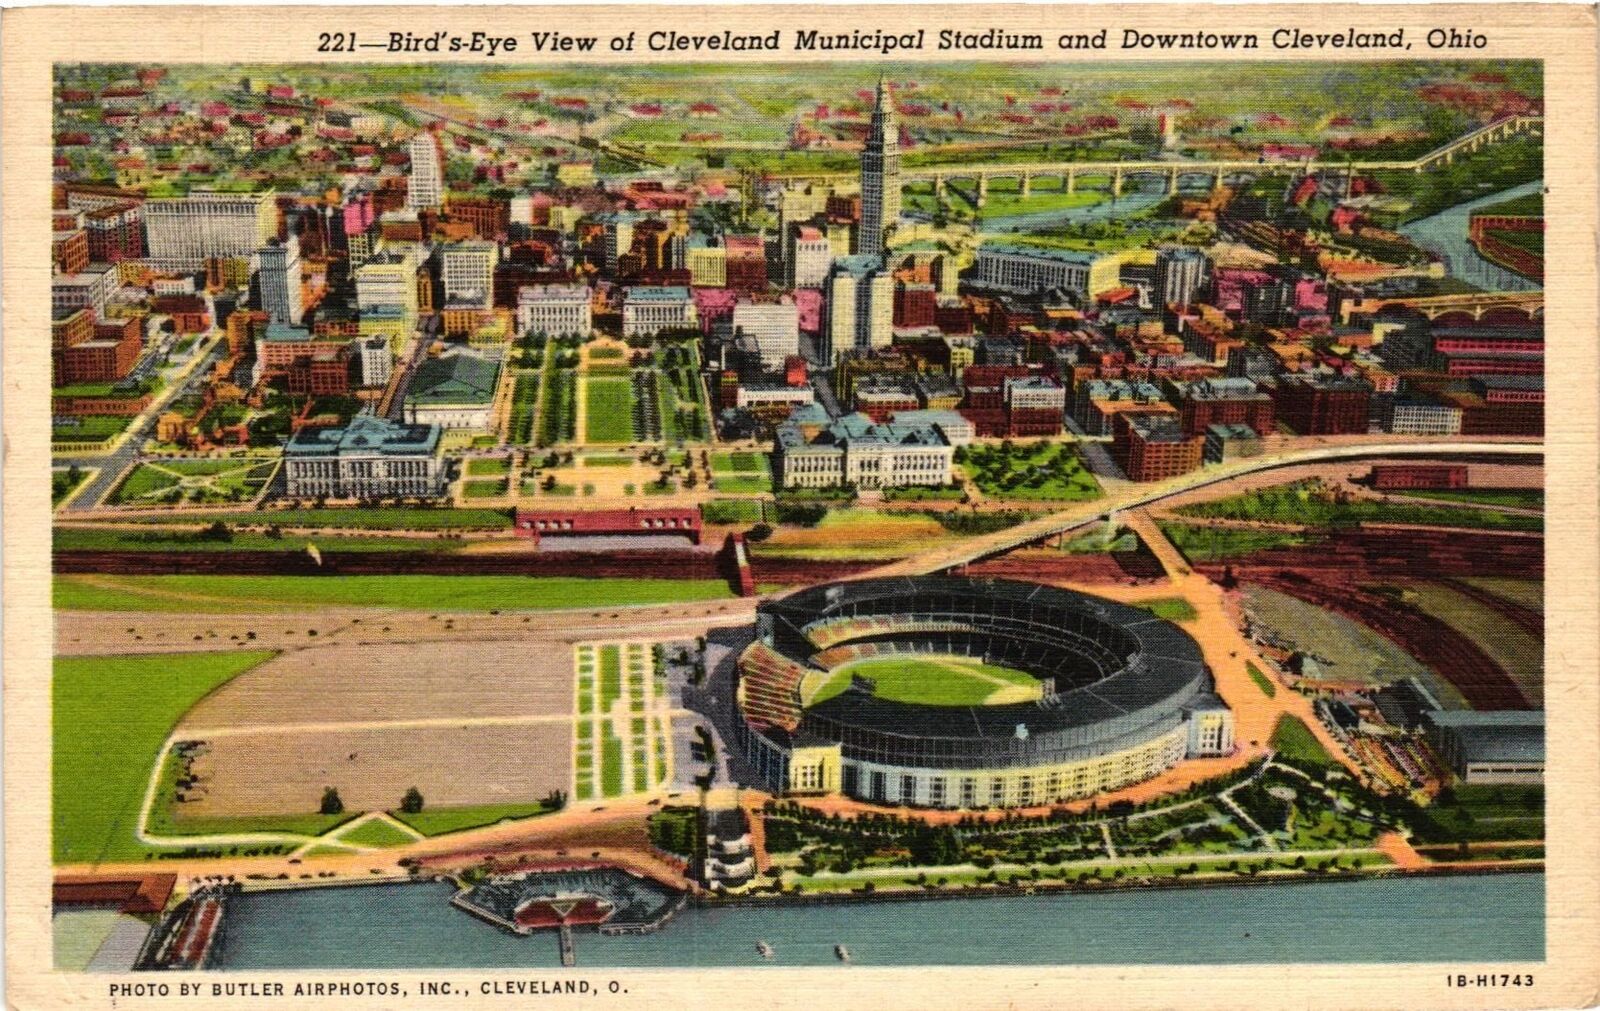 Vintage Postcard- CLEVELAND MUNICIPAL STADIUM AND DOWNTOWN, CLEVELAN Early 1900s